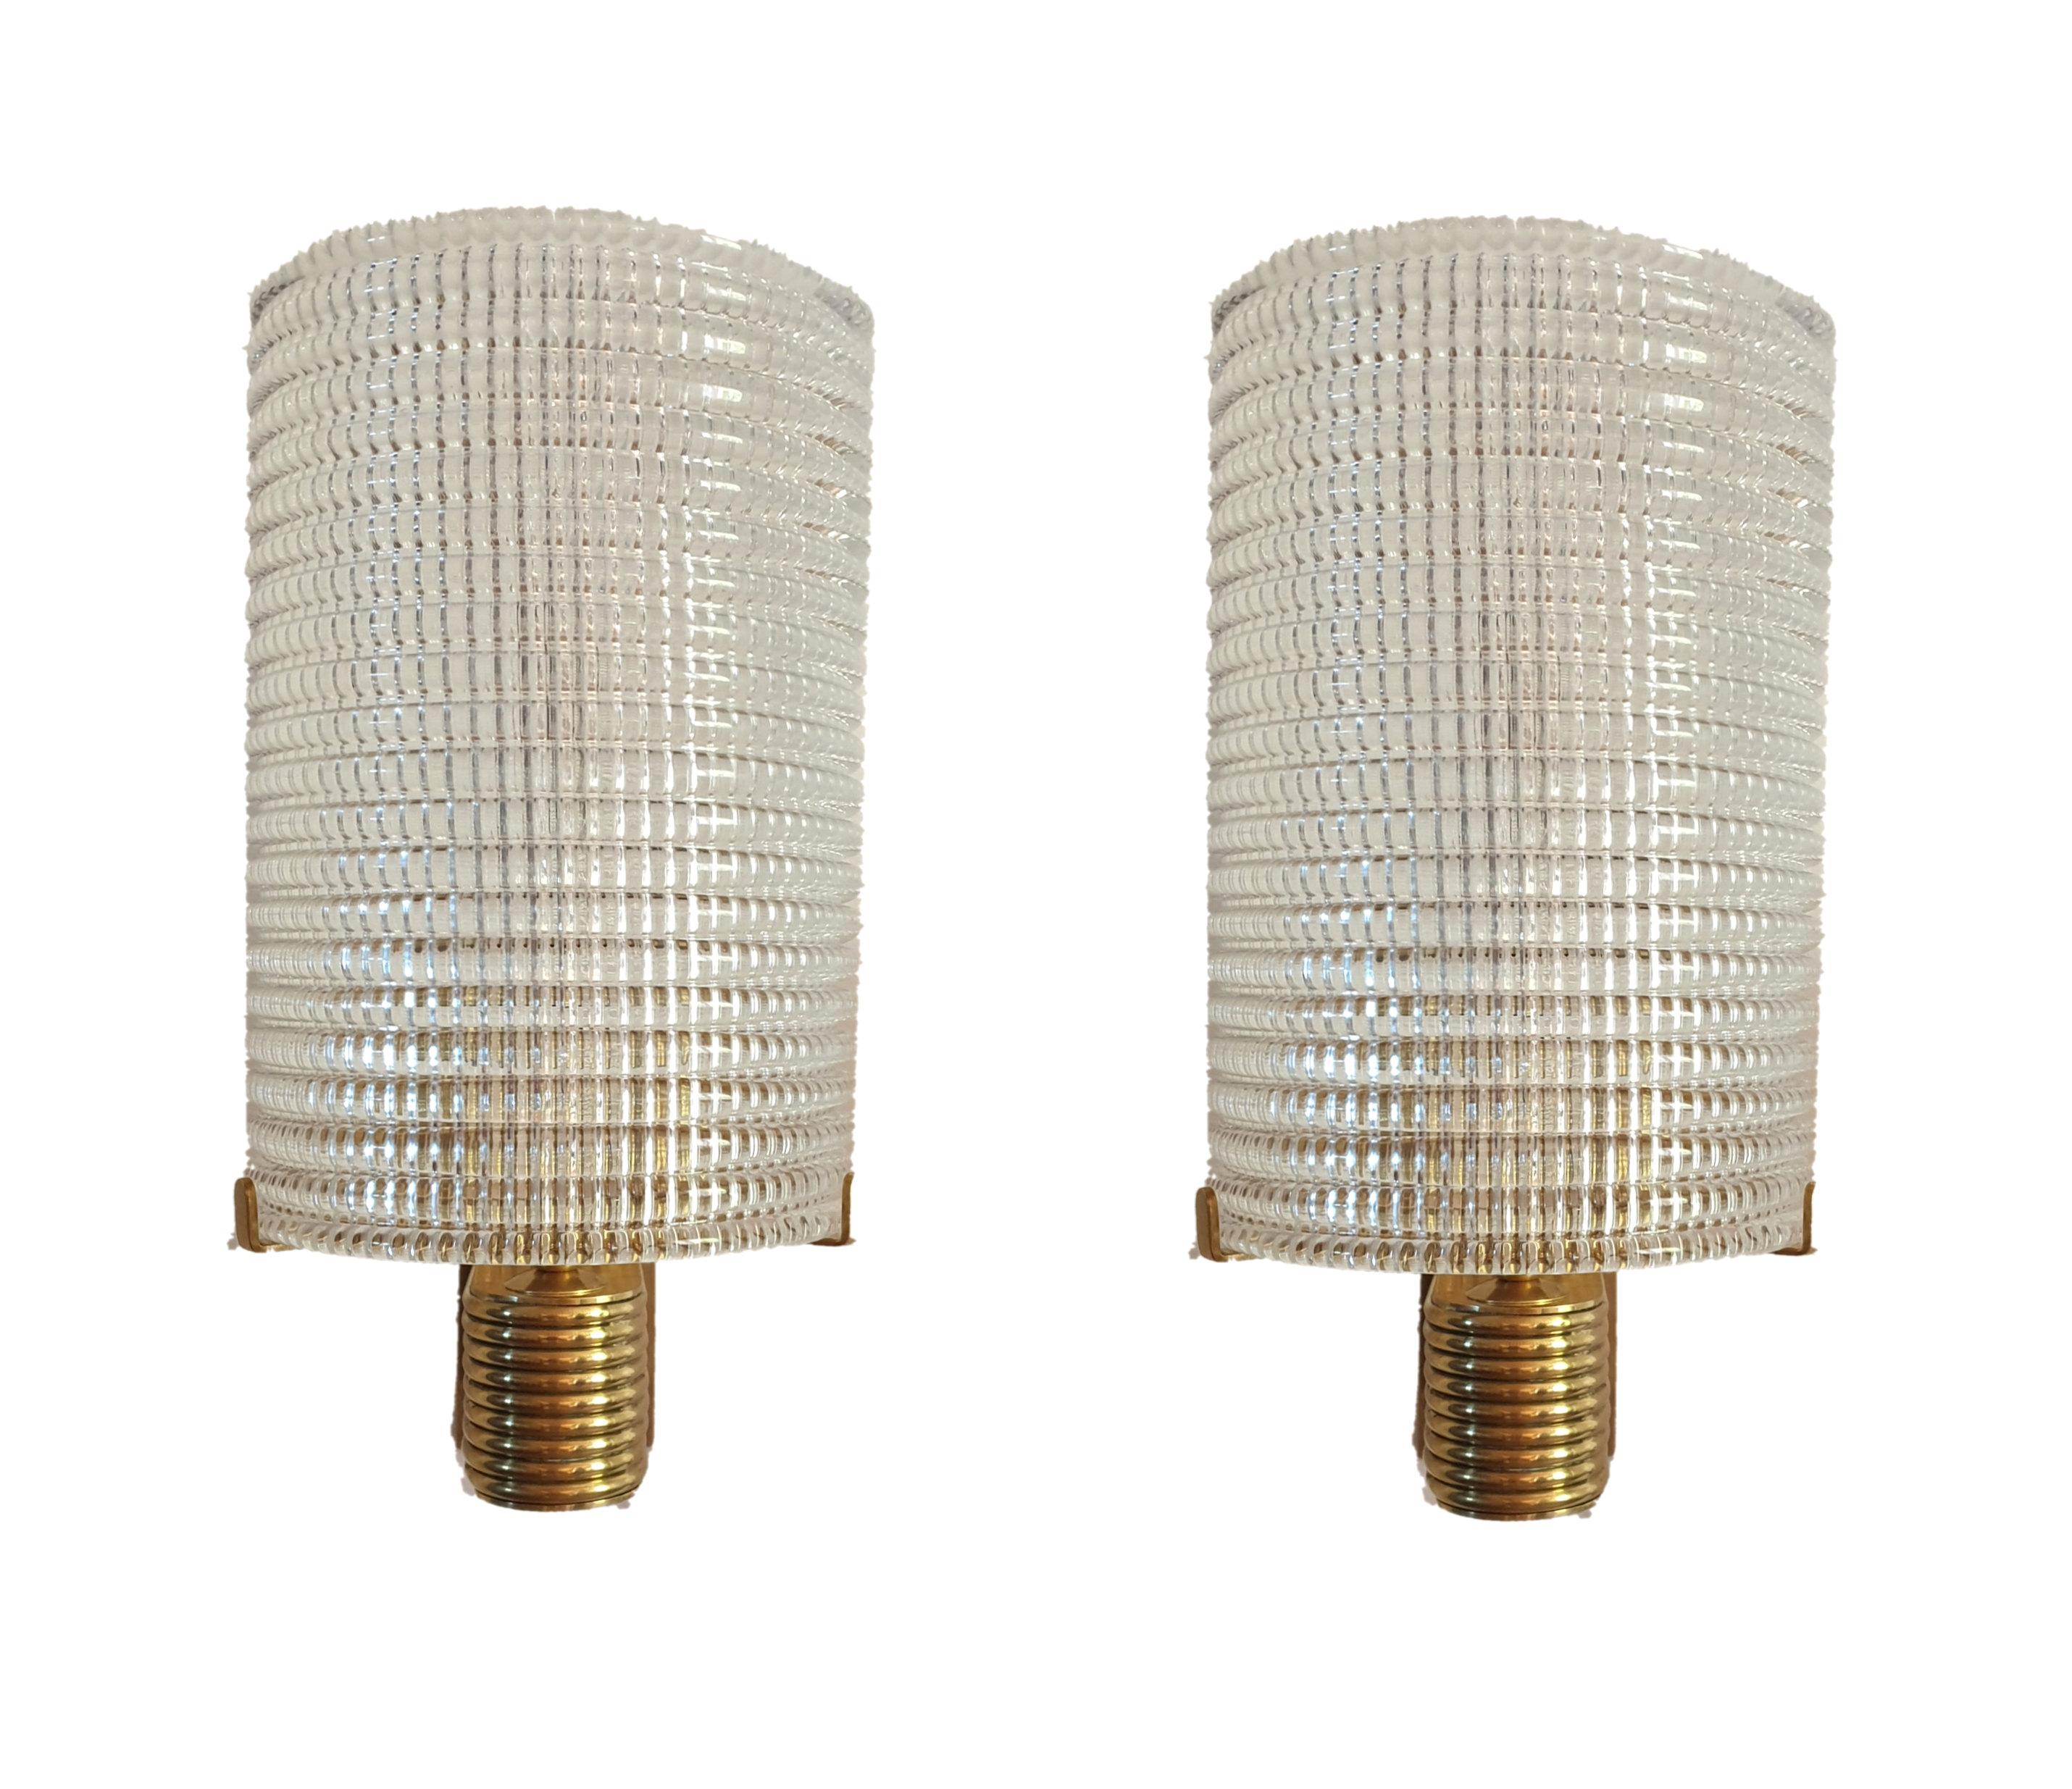 Pair of textured clear Murano glass and brass wall sconces, Mid-Century Modern, Italy, 1960s.
One light each, rewired.
Their design is simple and elegant.
Beautiful light when lit.
Excellent condition.
 